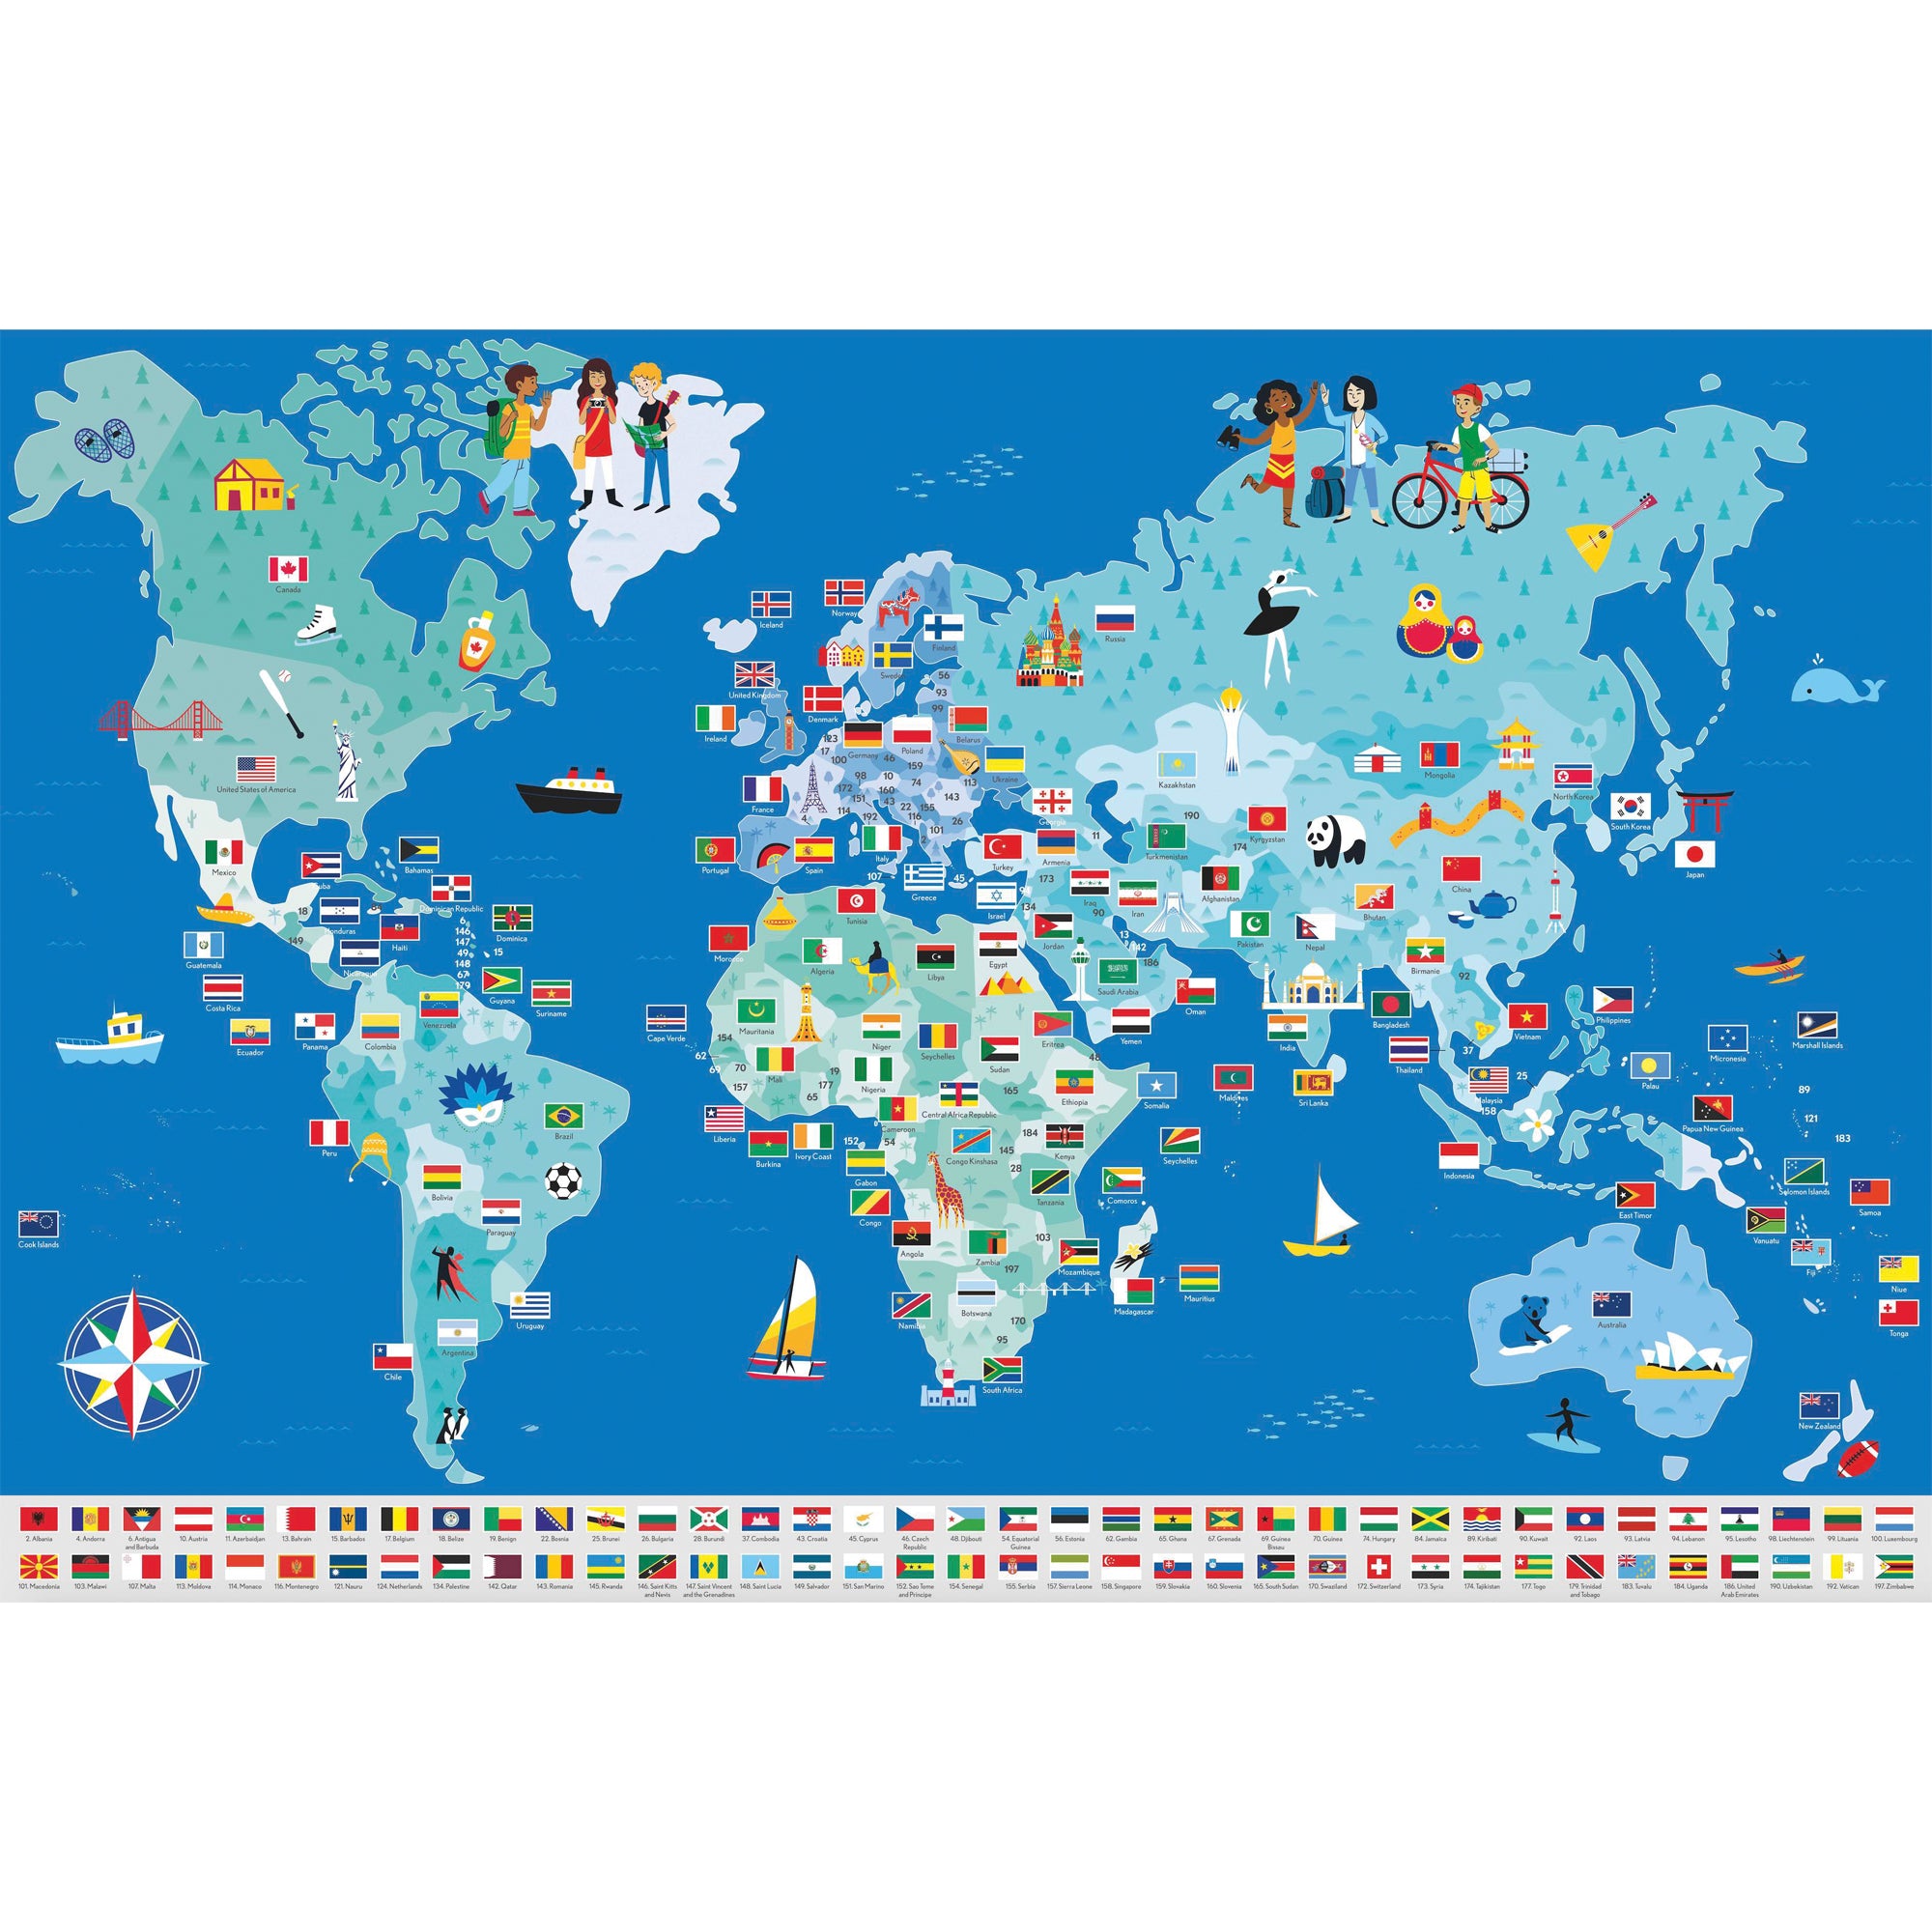 World map with flags of the world stickers placed onto the map. Map is mainly blue colors with colorful graphics of children and country-related items placed throughout.